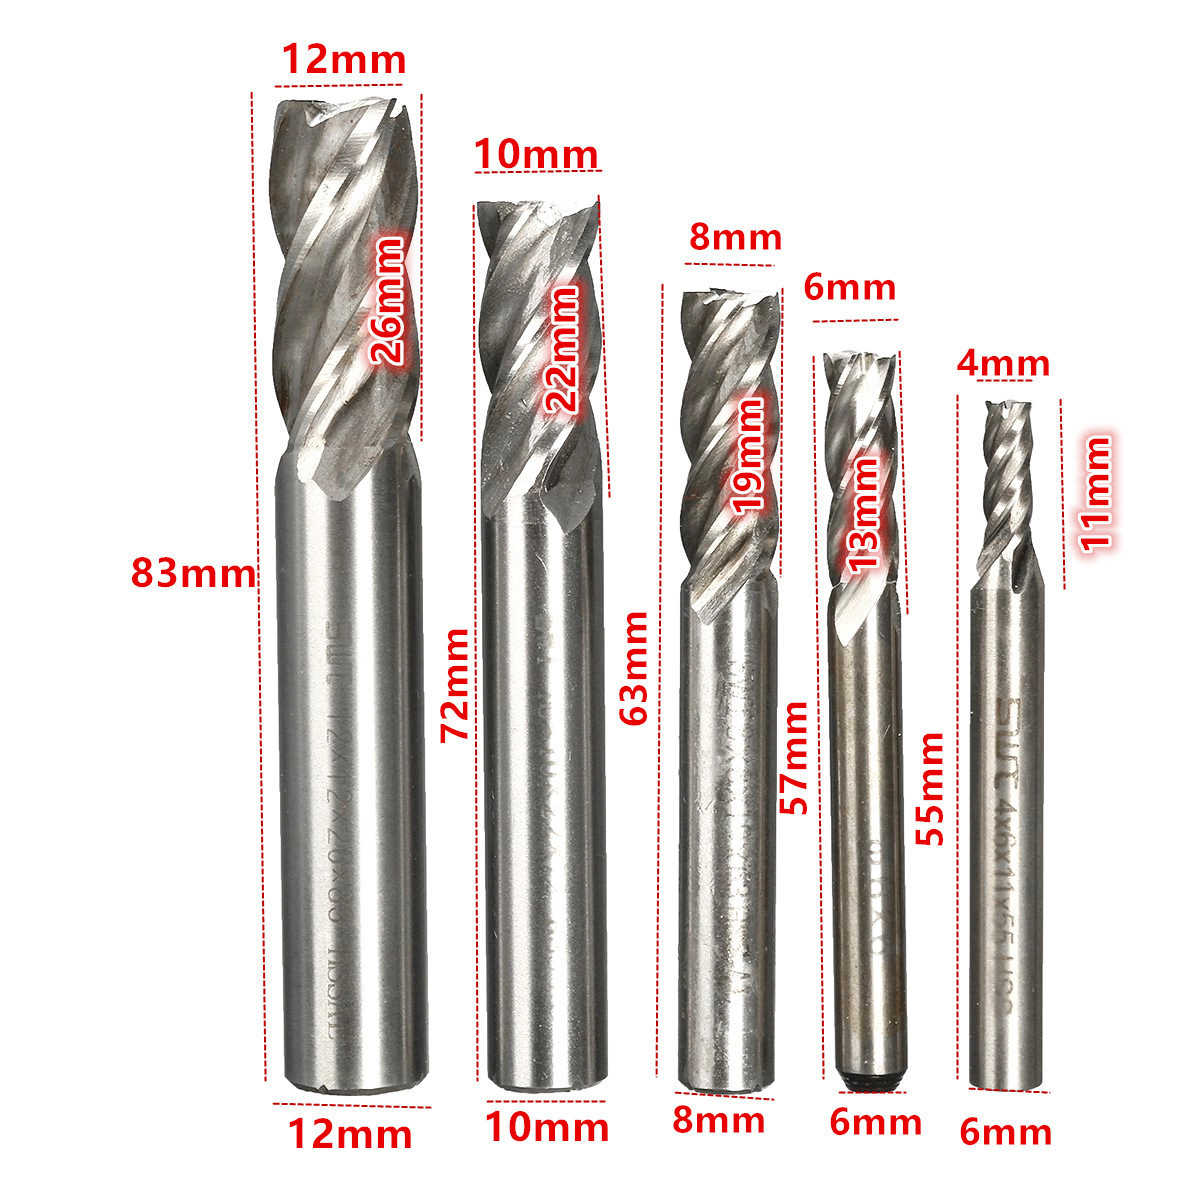 Straight Shank 4 Flutes End Mill Cutter Set for CNC Milling Machine Tool Bit